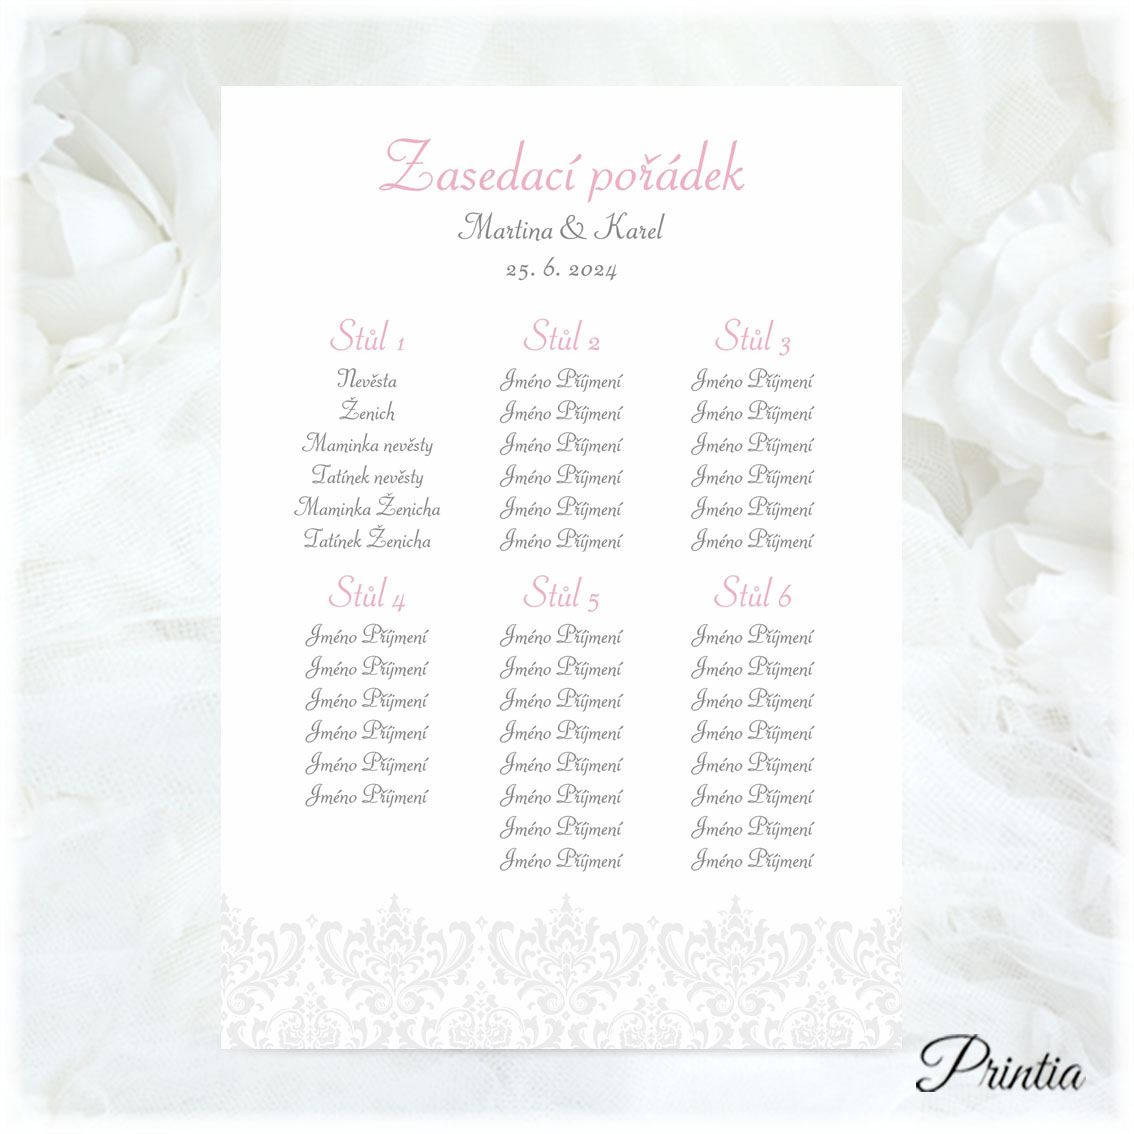 Wedding seating plan with chateau ornament